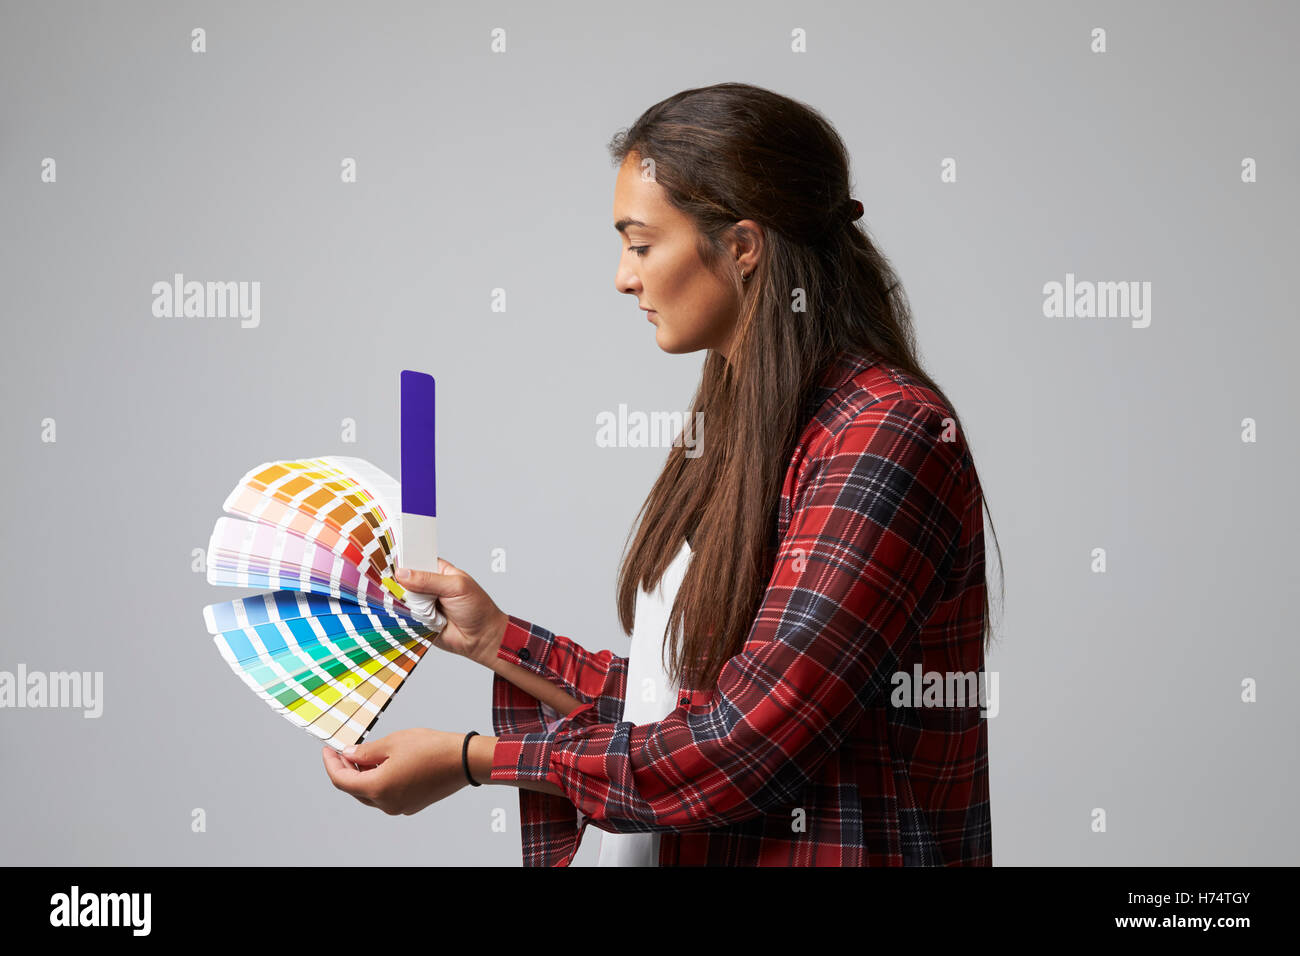 Studio Shot Of Female Graphic Designer With Color Swatches Stock Photo